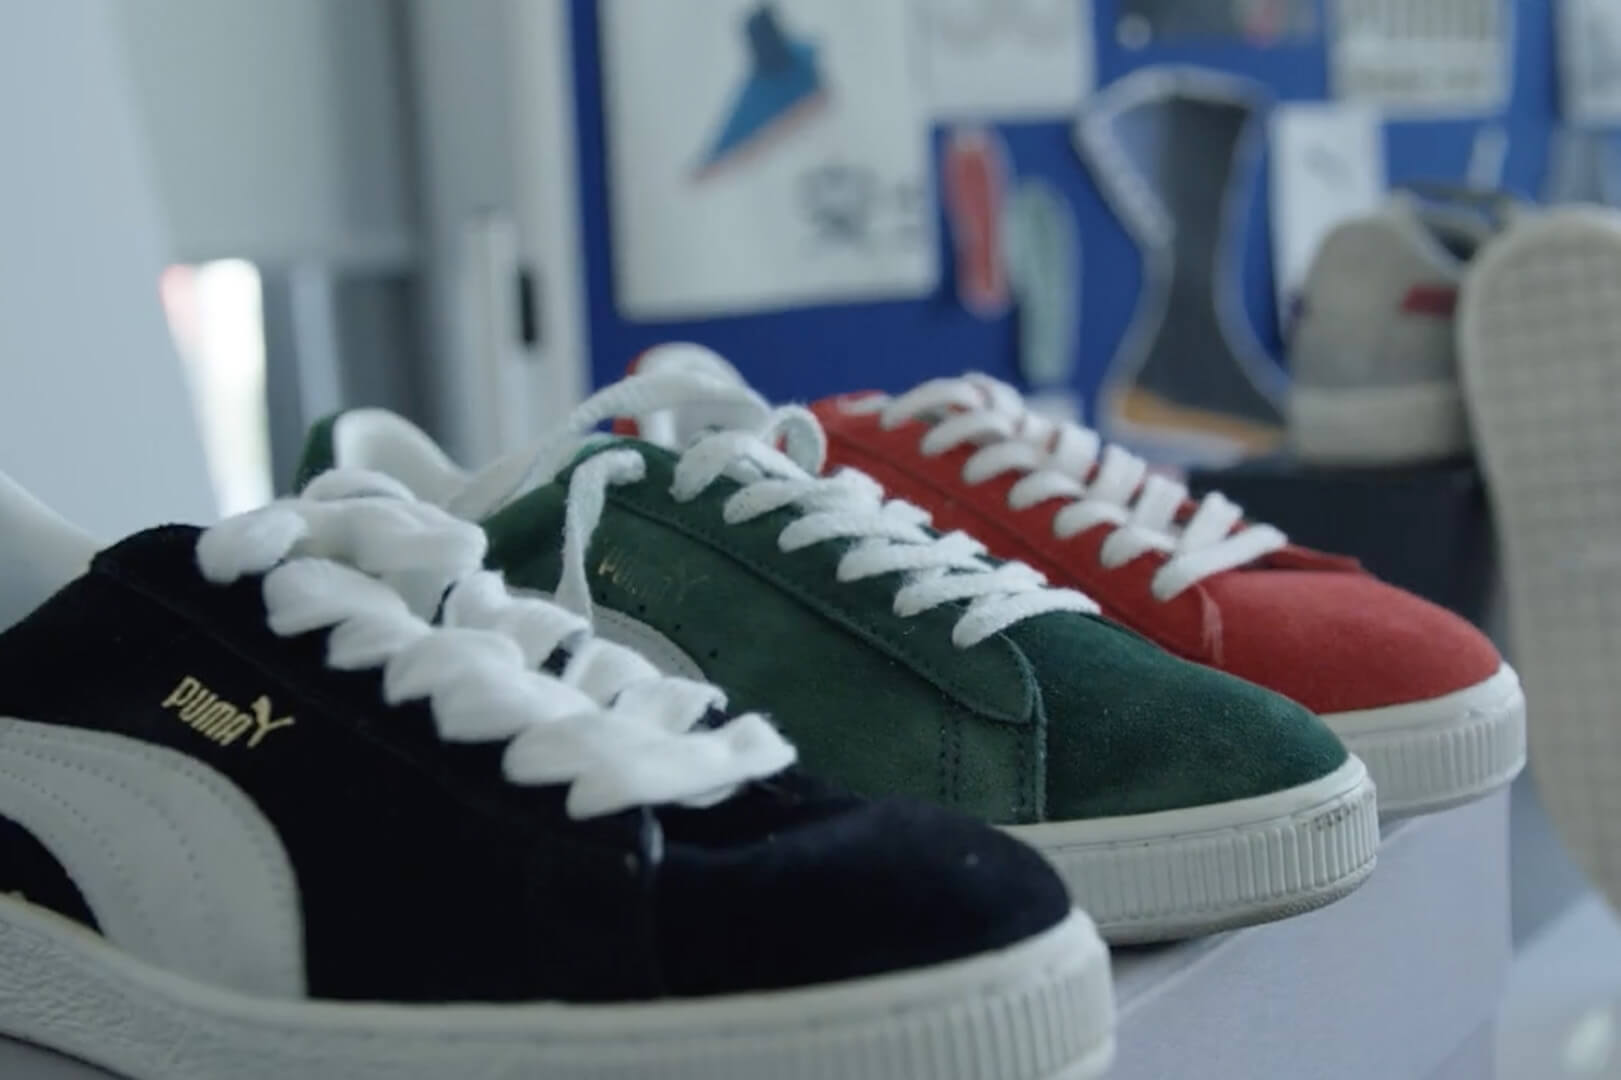 PUMA Suede 50th Anniversary: The Year of the Suede